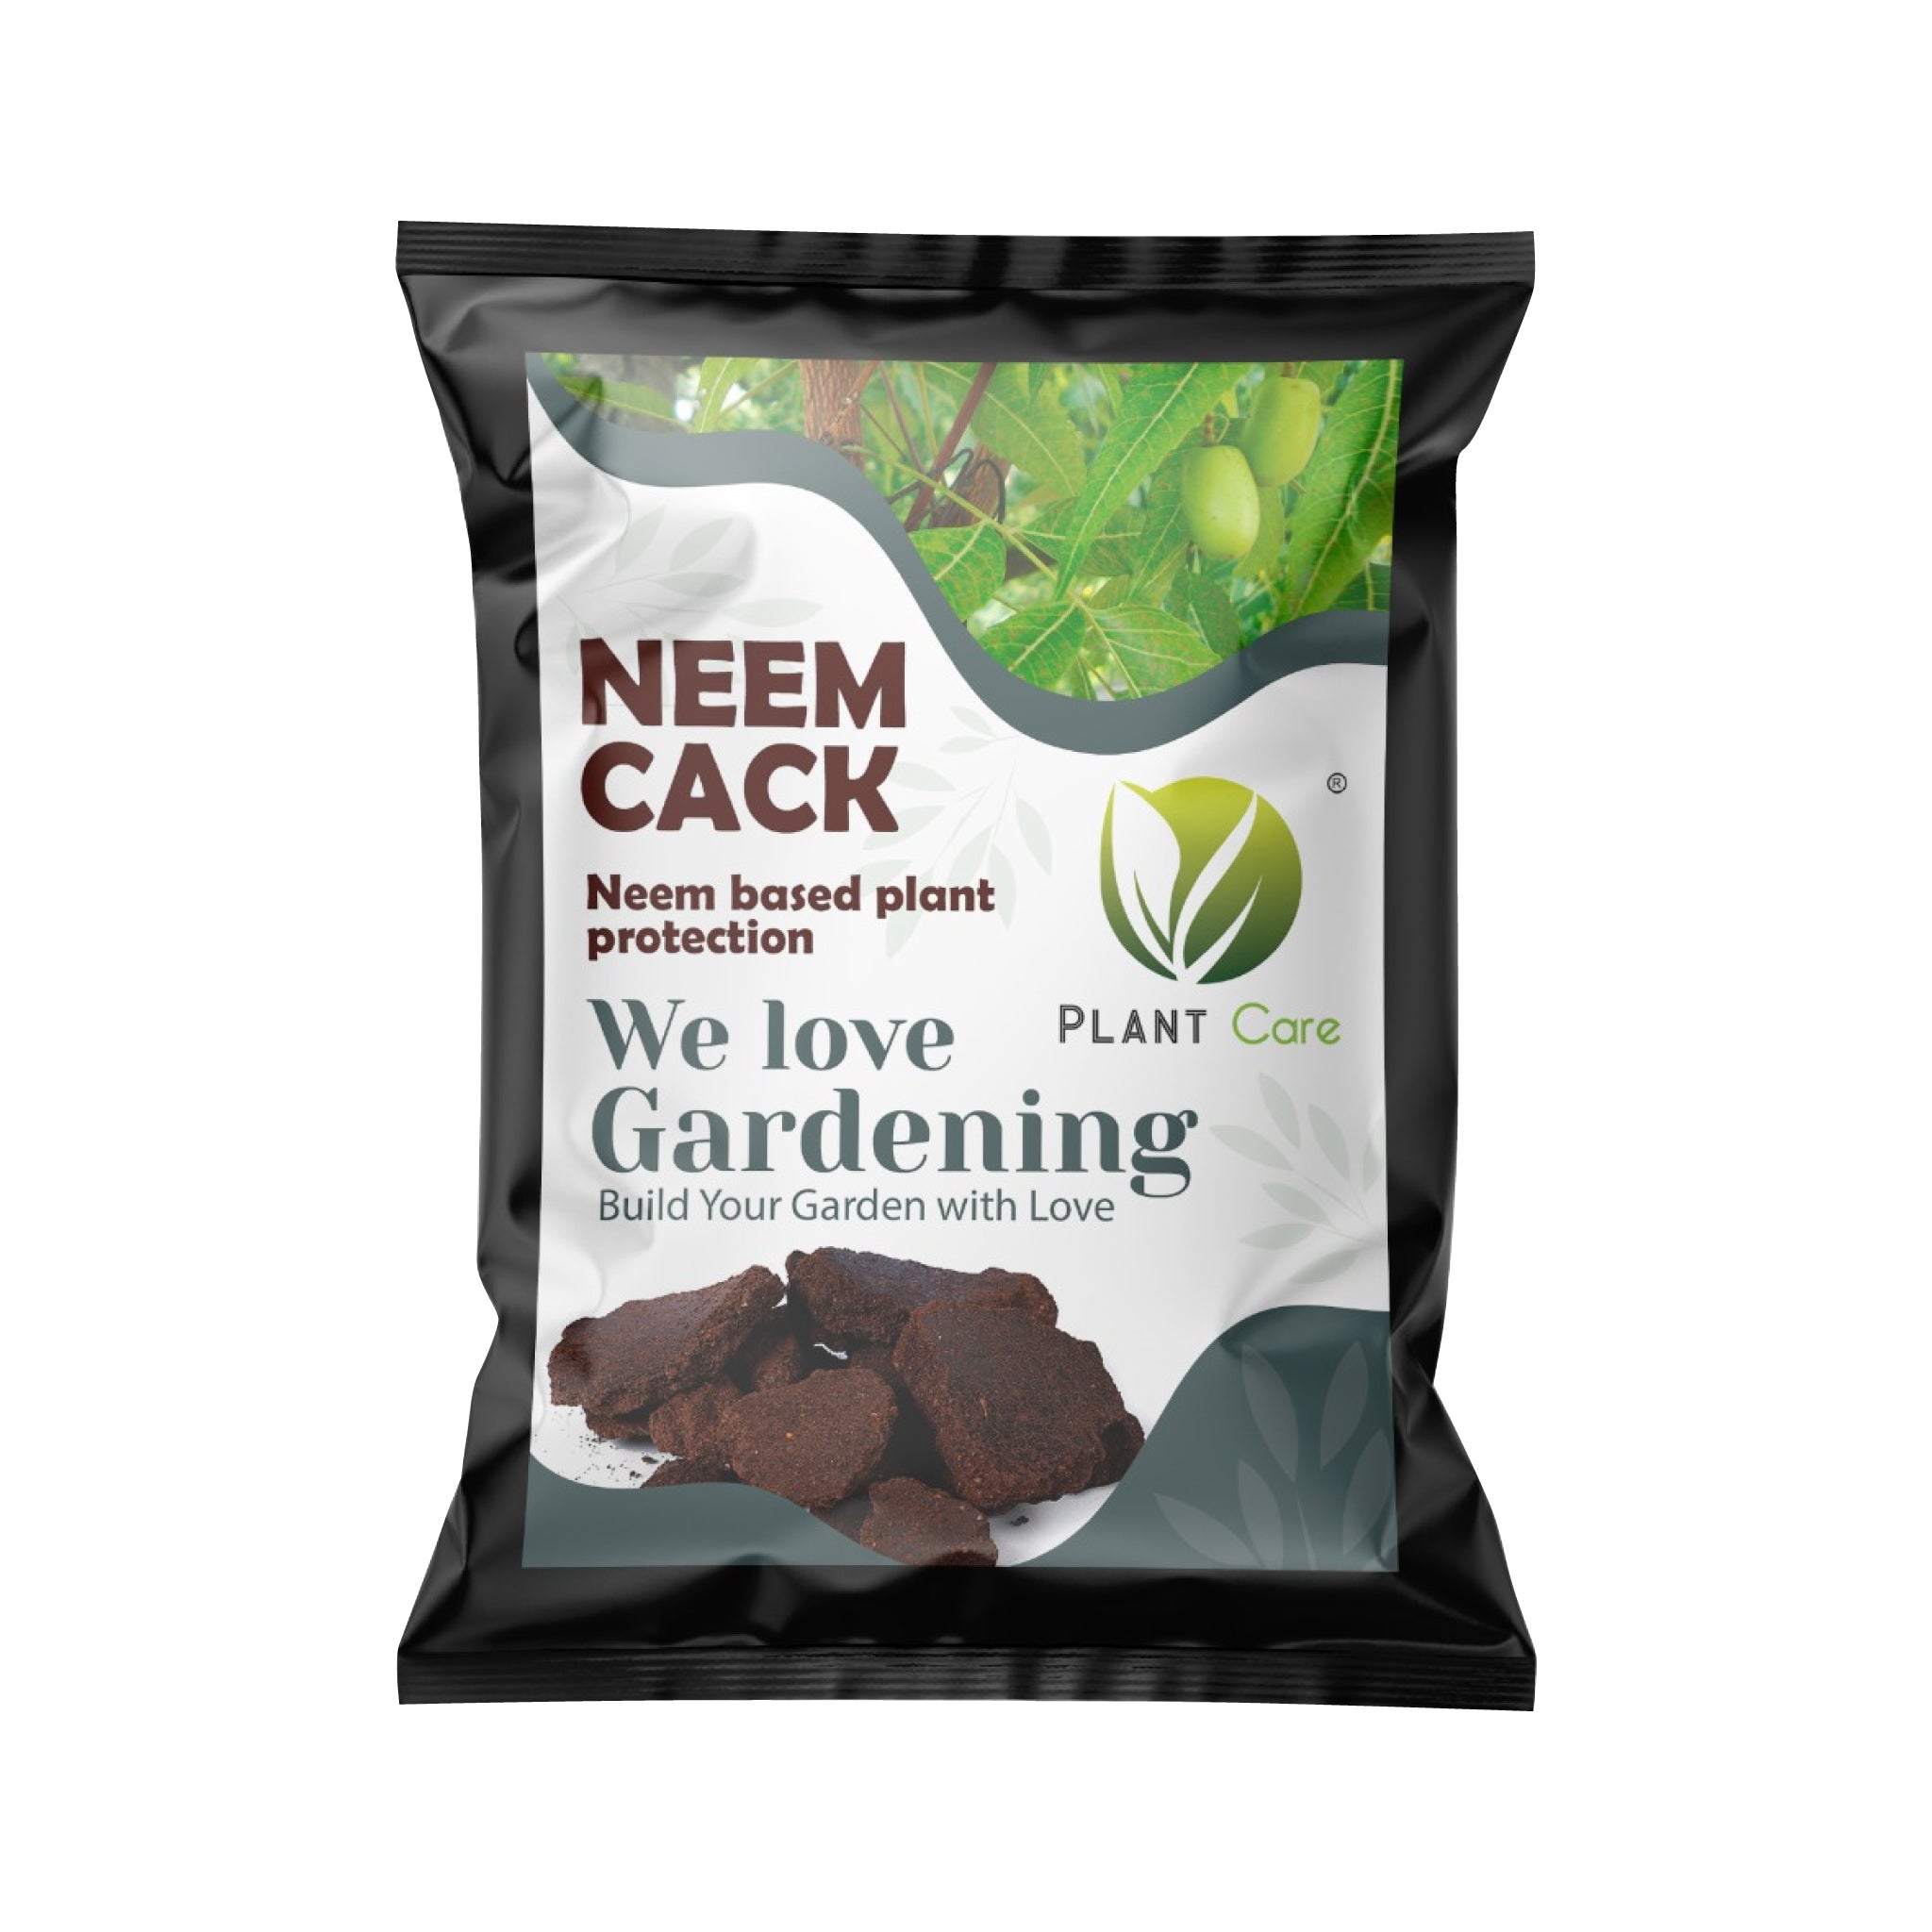 Protect your plants with our neem cake